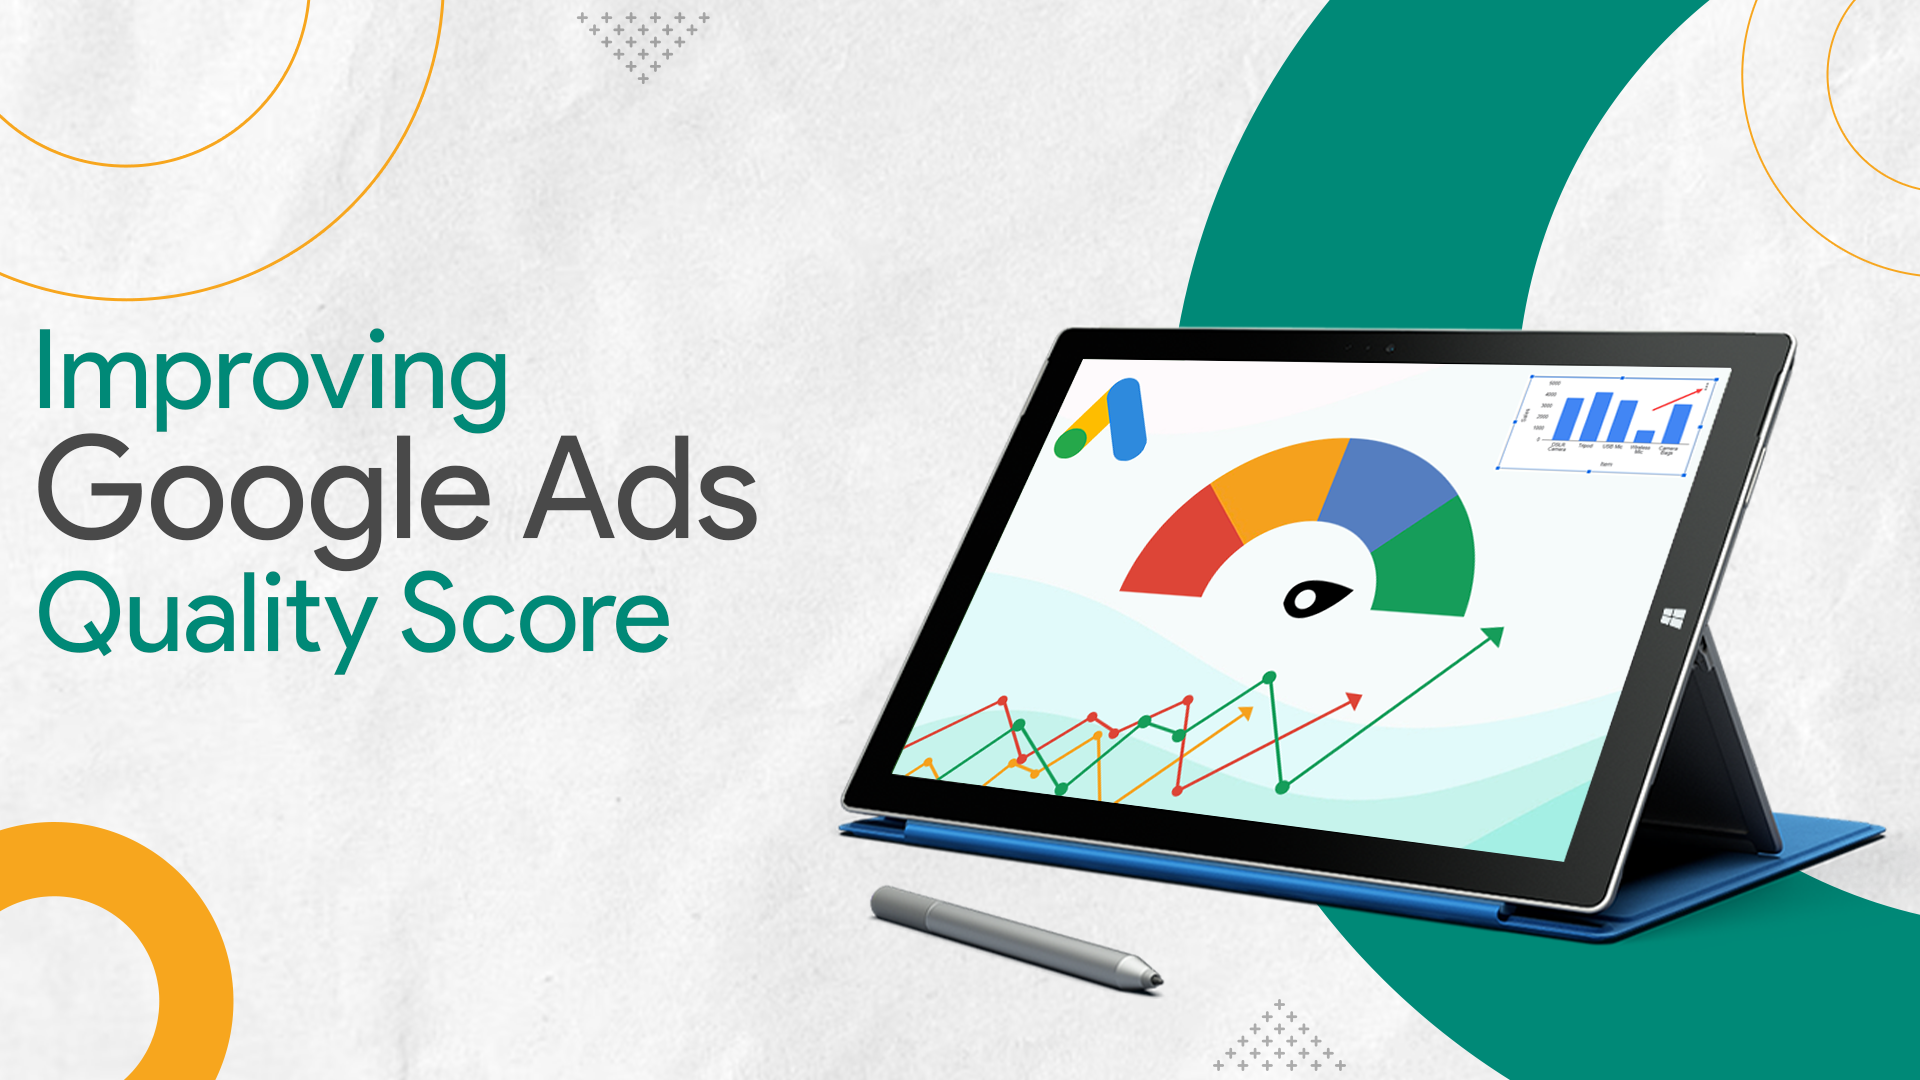 Improving Google Ads Quality Score: Best Practices